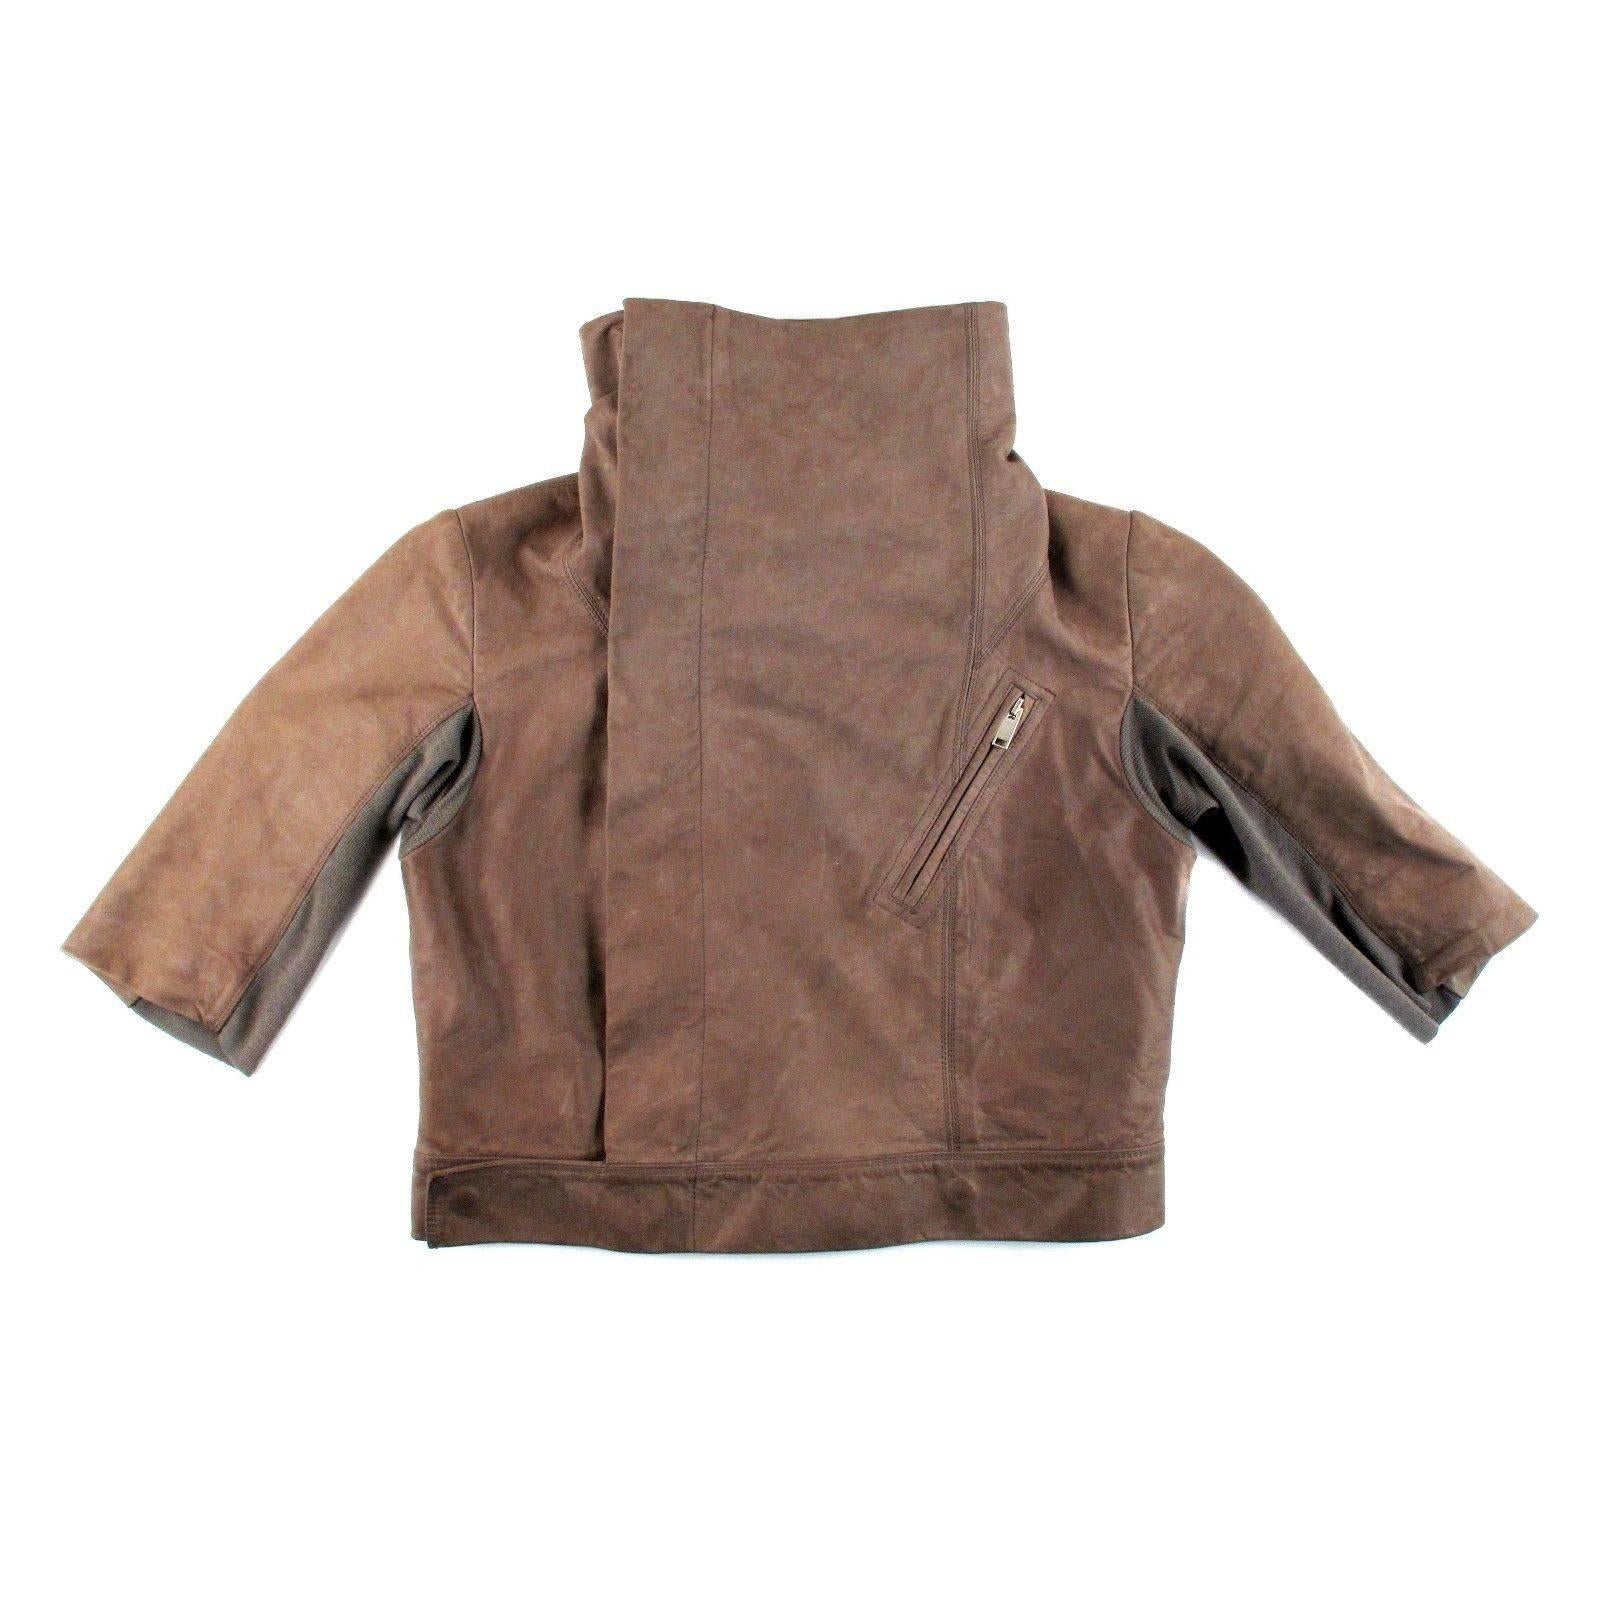 Size: US 6 / 8 - 42

Color: Brown

Material: 100% Leather - Rib 100% Wool - 100% Rayon

------------------------------------------------------------

Details:

- short sleeves

- zip front closure

- zip chest pocket

- item #